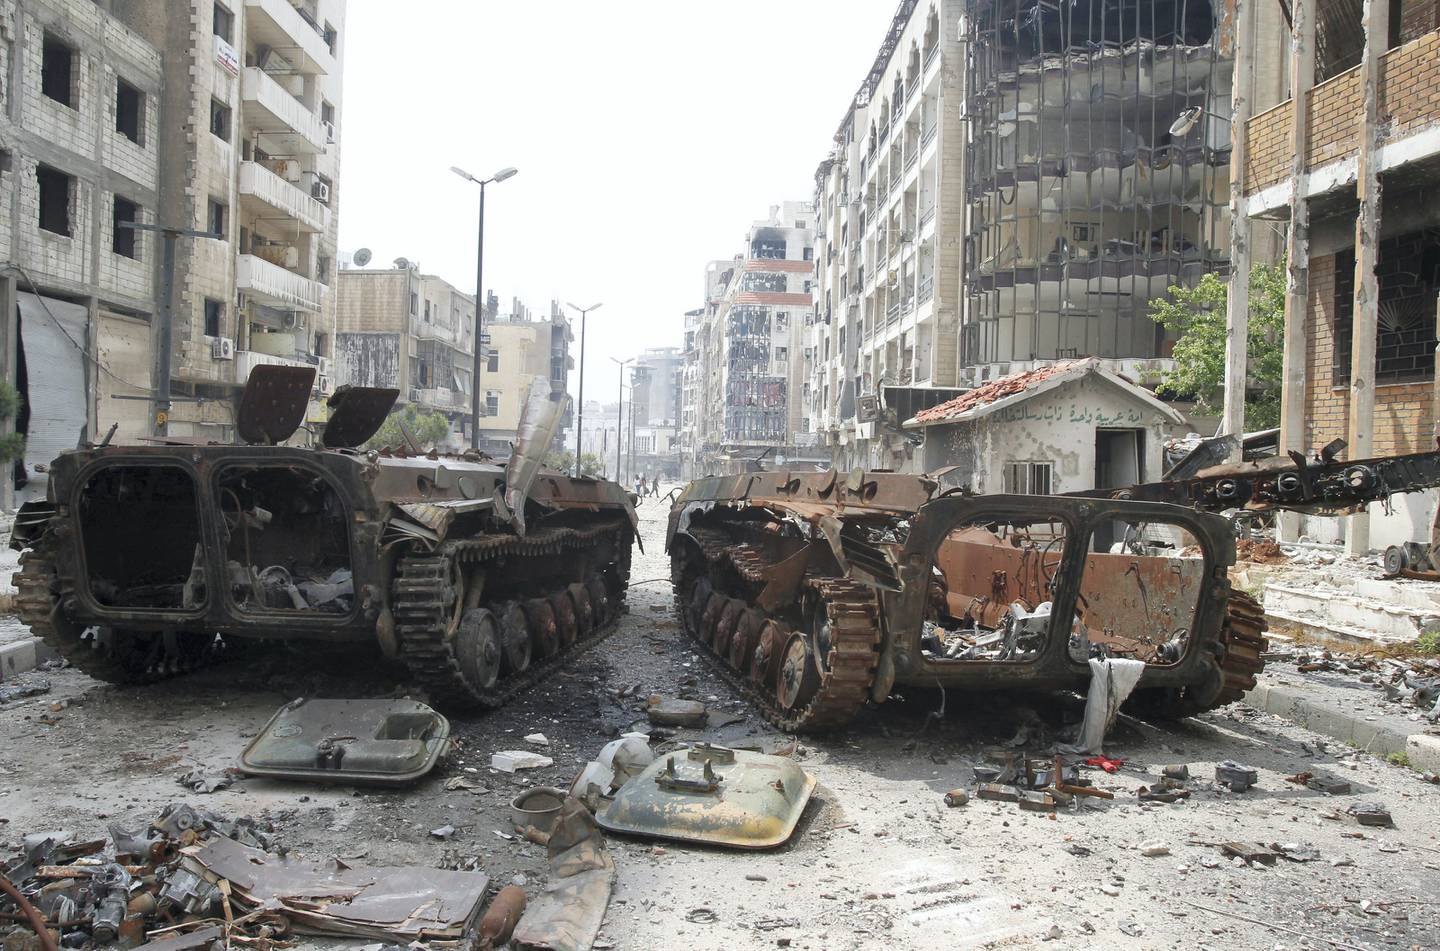 The wreckage of armoured personnel carriers belonging to the forces loyal to Syria's President Bashar al-Assad are seen at al-Hamdeya neighborhood in Homs city May 9, 2014. Around 270 Syrian rebels granted safe exit under a complex deal with President Bashar al-Assad's forces are being held in Homs by the army after insurgents elsewhere failed to uphold their side of the agreement, Syrian officials said on Friday. Following a year of siege, around 1,200 rebels and residents in the Old City of Homs left the city on buses this week in exchange for the release of dozens of captives held by rebels in the northern provinces of Aleppo and Latakia. REUTERS/Khaled al-Hariri (SYRIA - Tags: POLITICS CONFLICT CIVIL UNREST MILITARY)